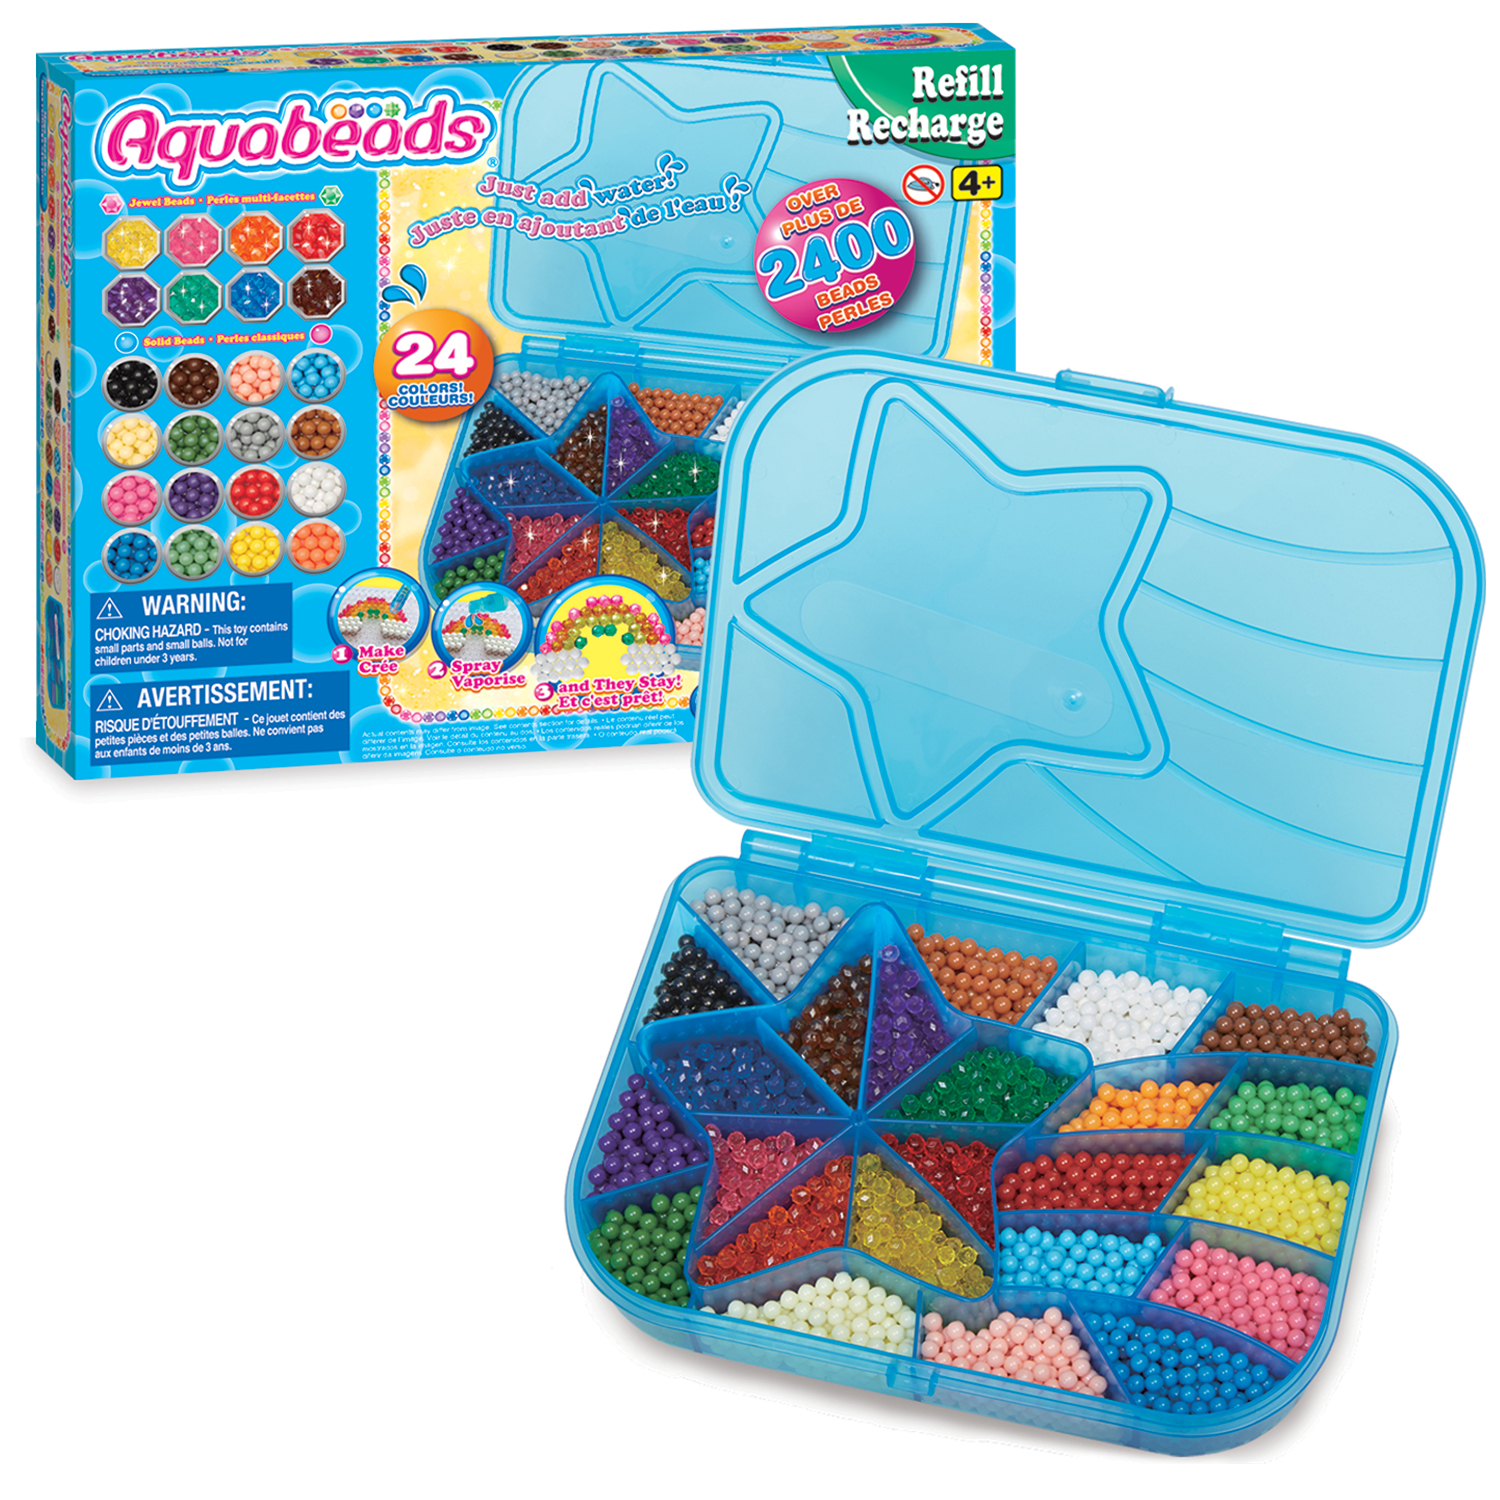 Aquabeads Mega Bead Refill Pack, Arts & Crafts Bead Refill Kit for Children - over 2,400 beads and shooting star storage case - image 1 of 6